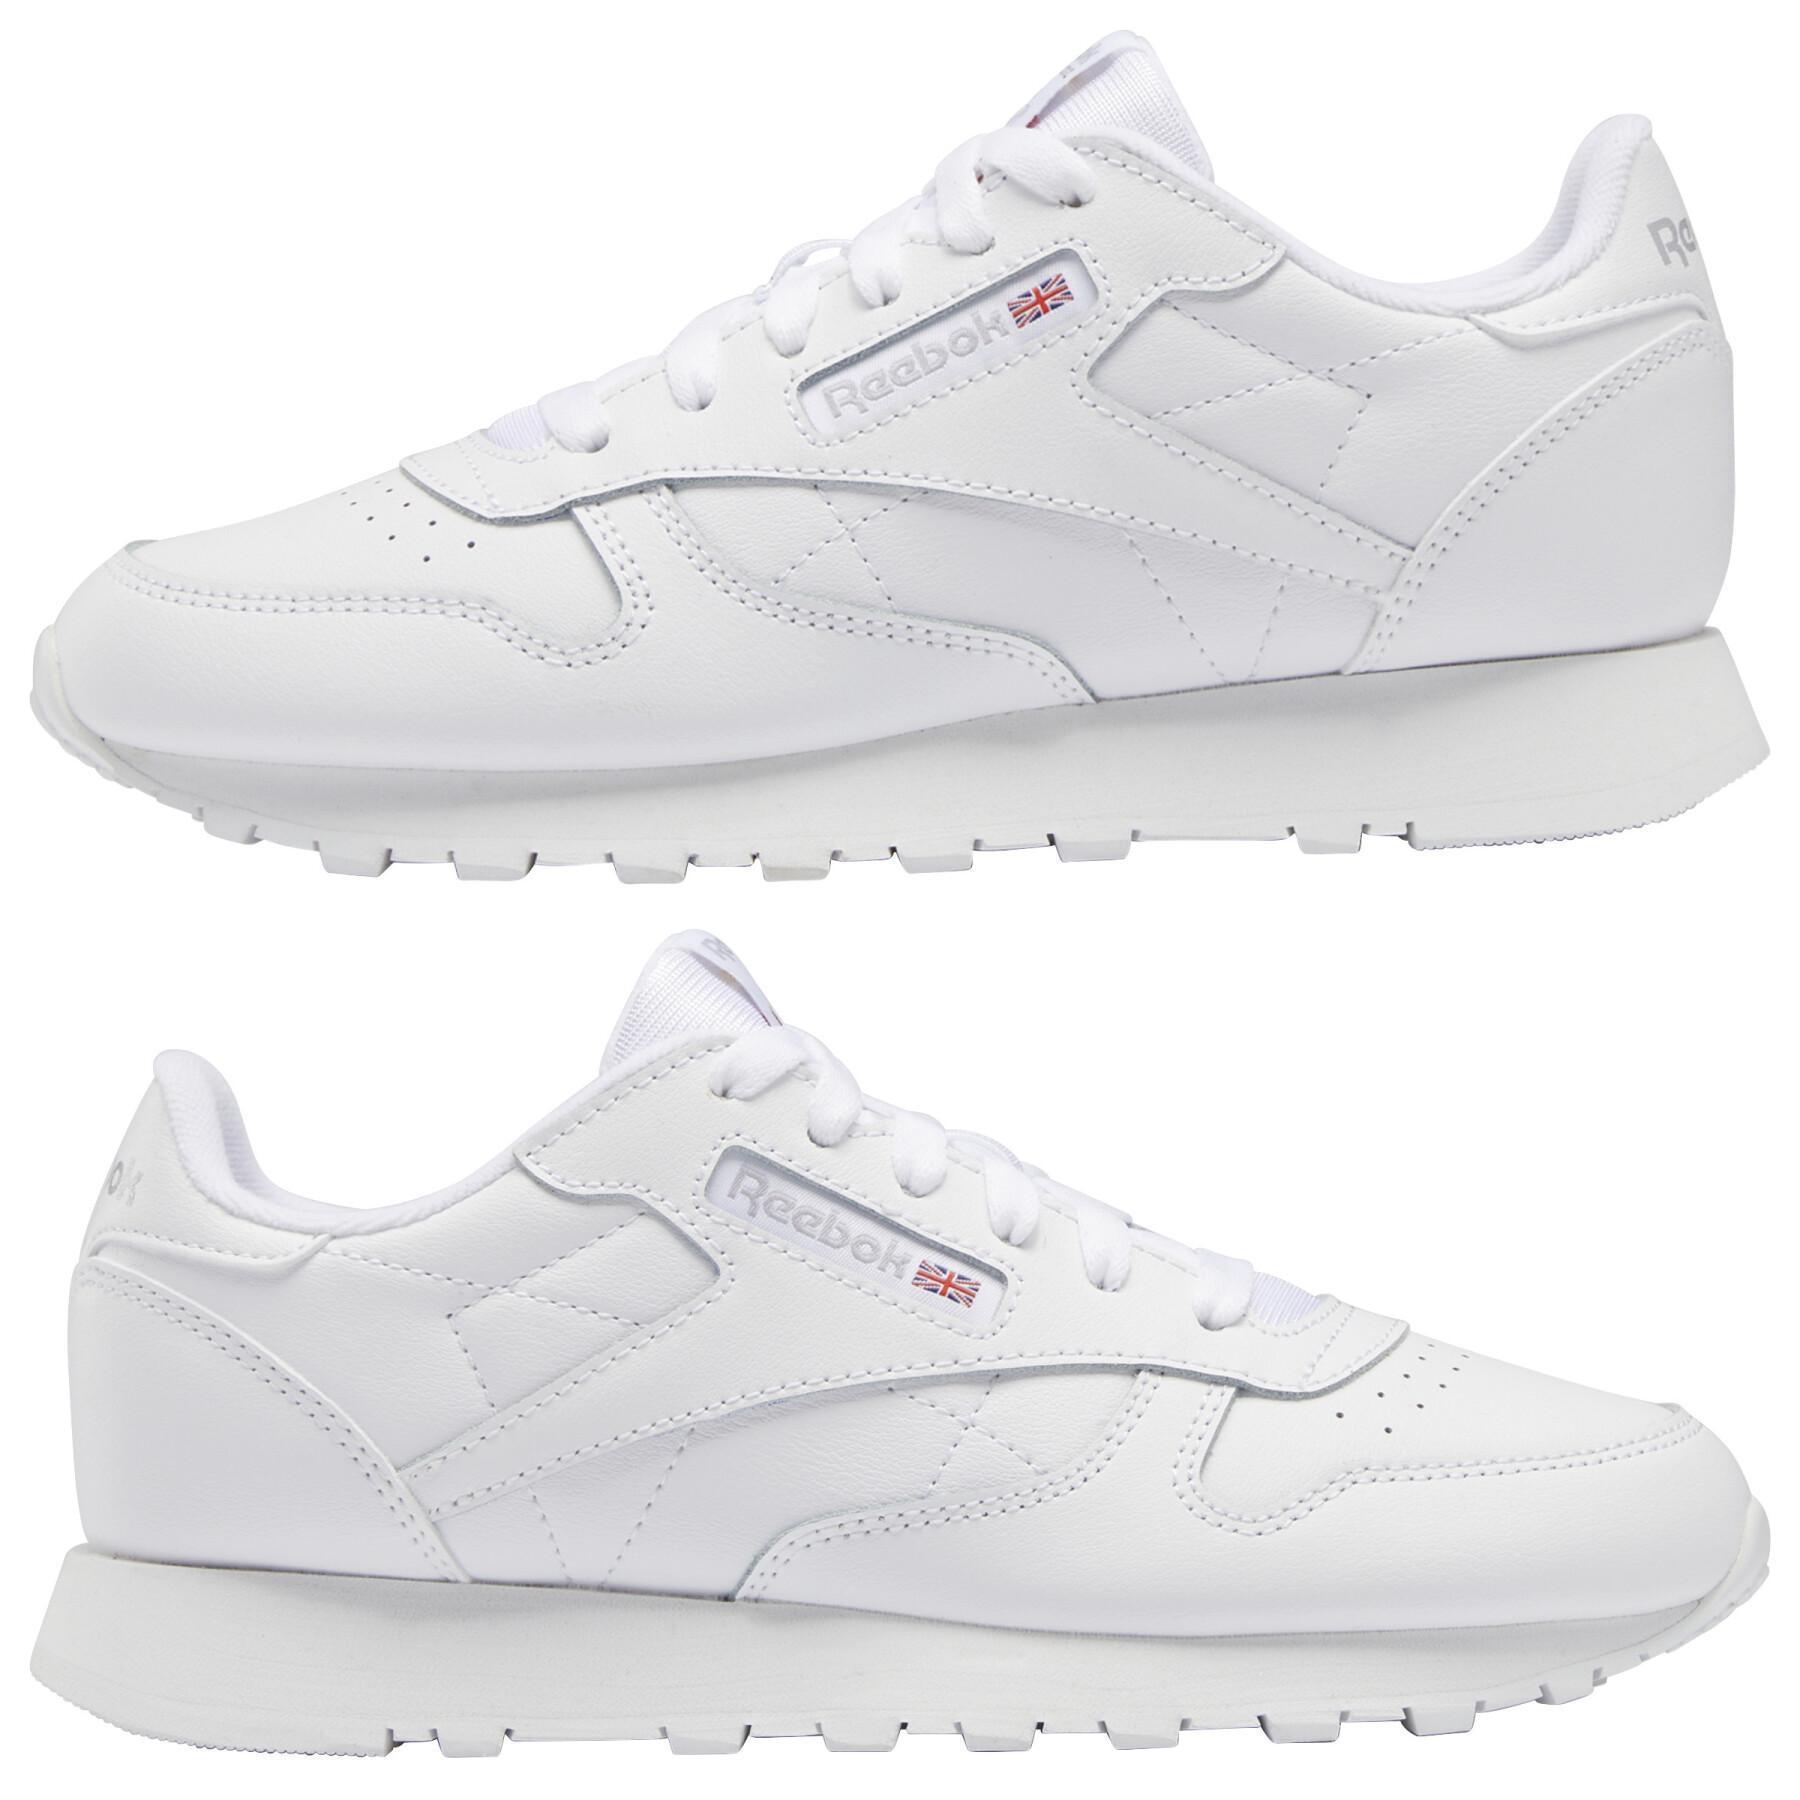 Chaussures enfant Reebok Classic Leather